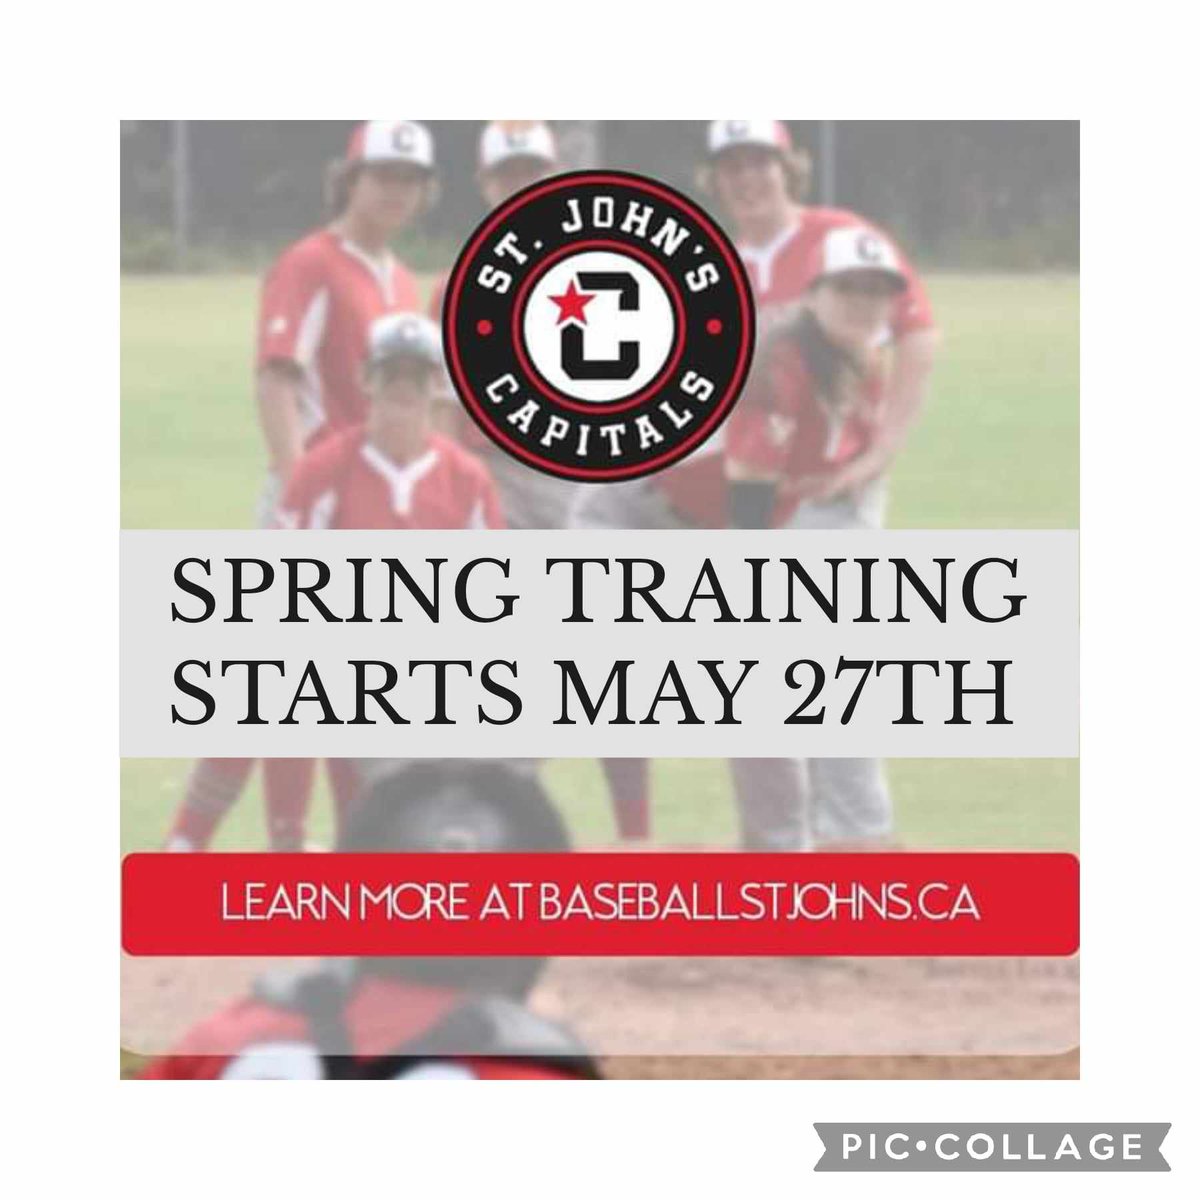 Spring training dates have been posted. Visit baseballstjohns.ca for more information. Session details will be provided prior to start of registration in April.